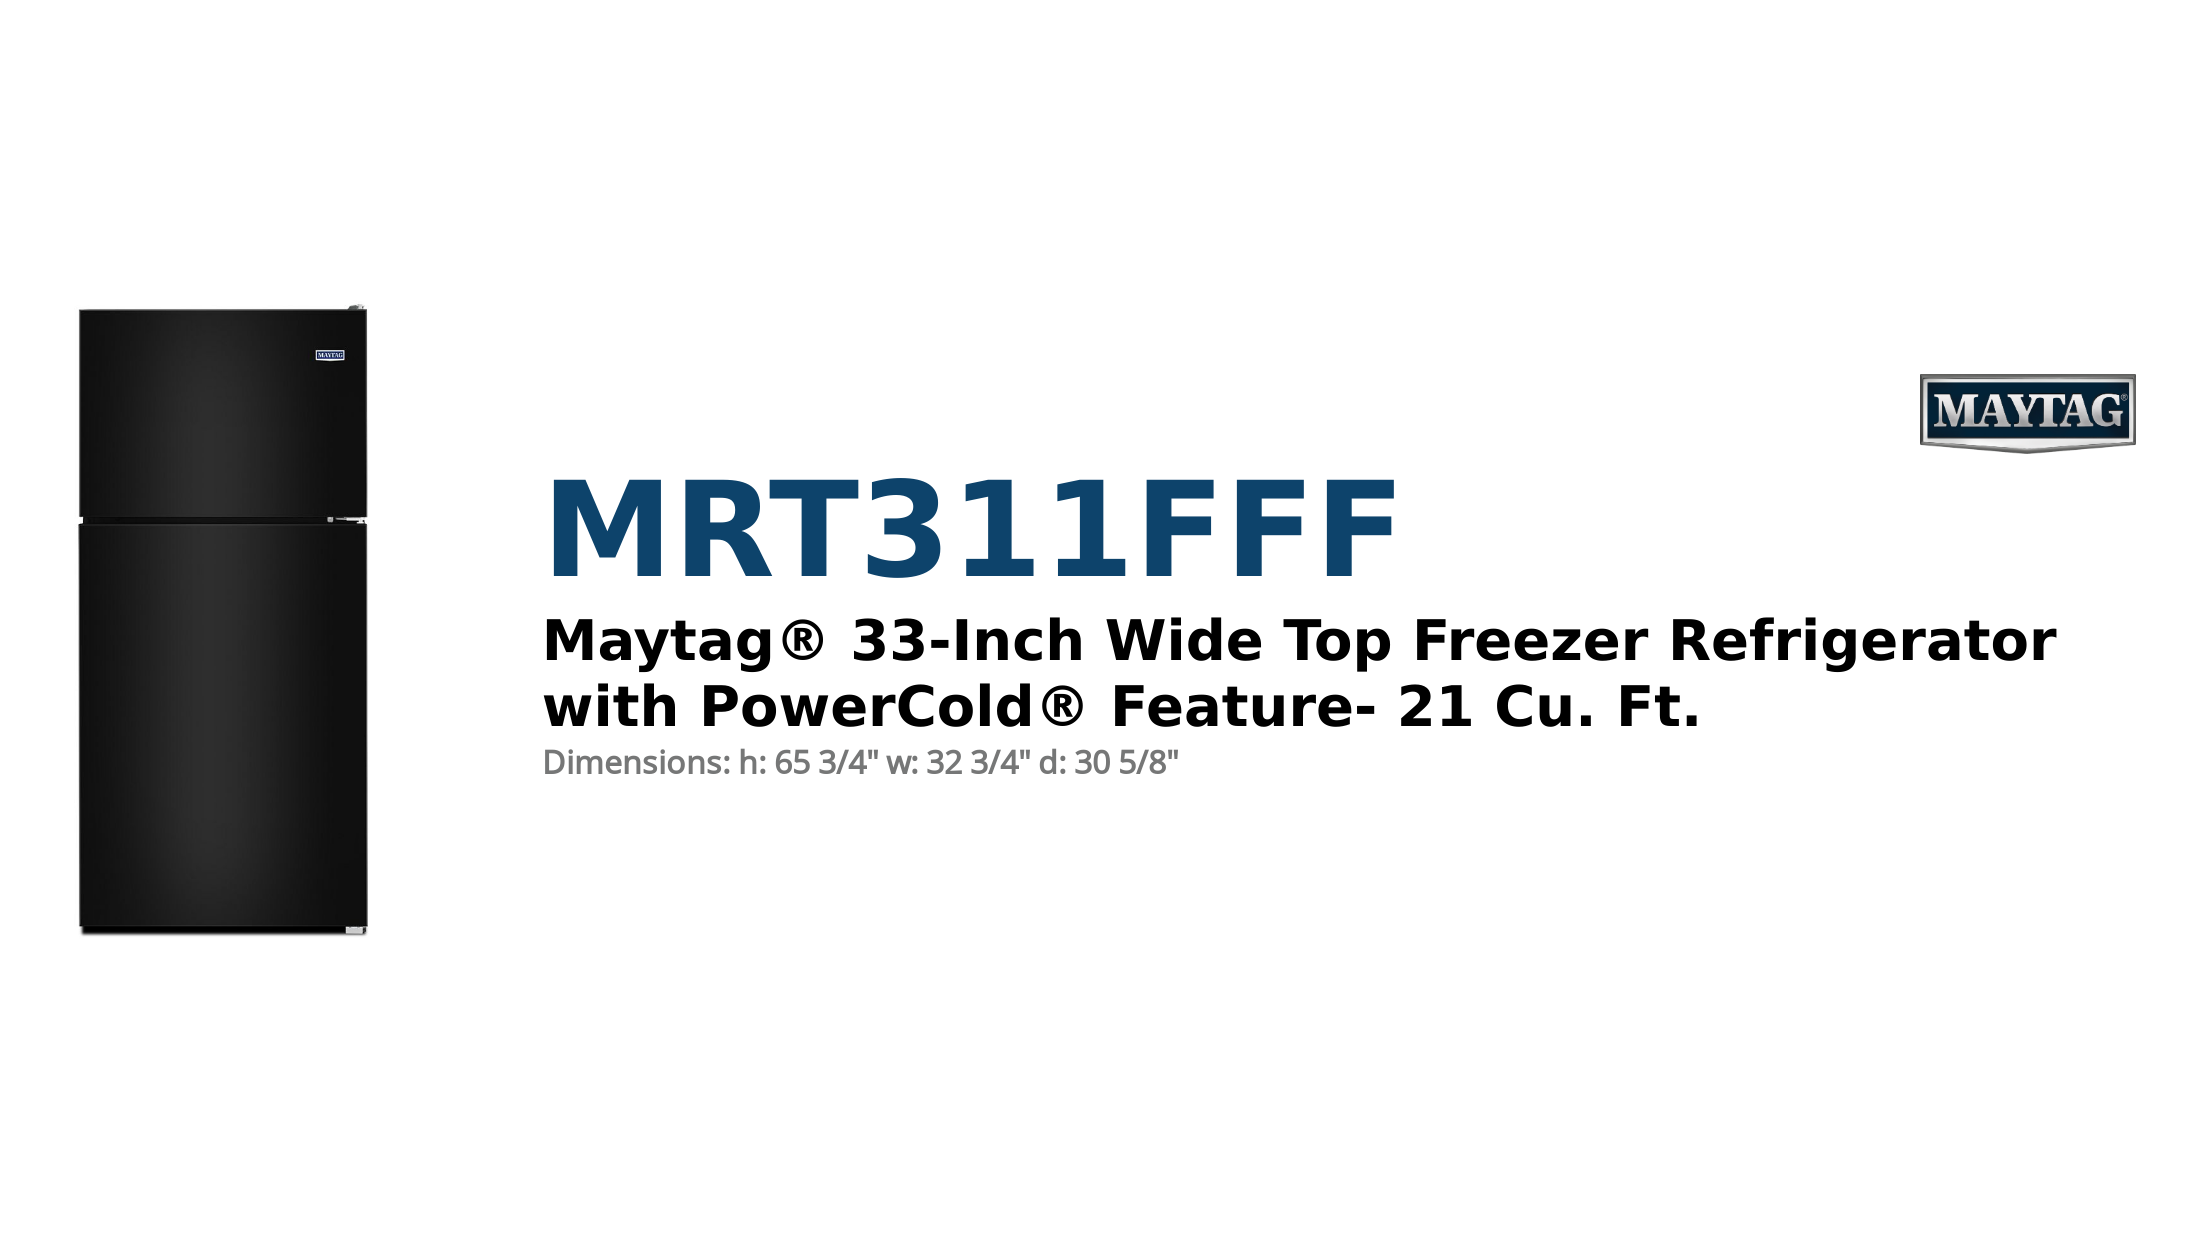 Maytag® 33-Inch Wide Top Freezer Refrigerator with PowerCold® Feature- 21 Cu. Ft.